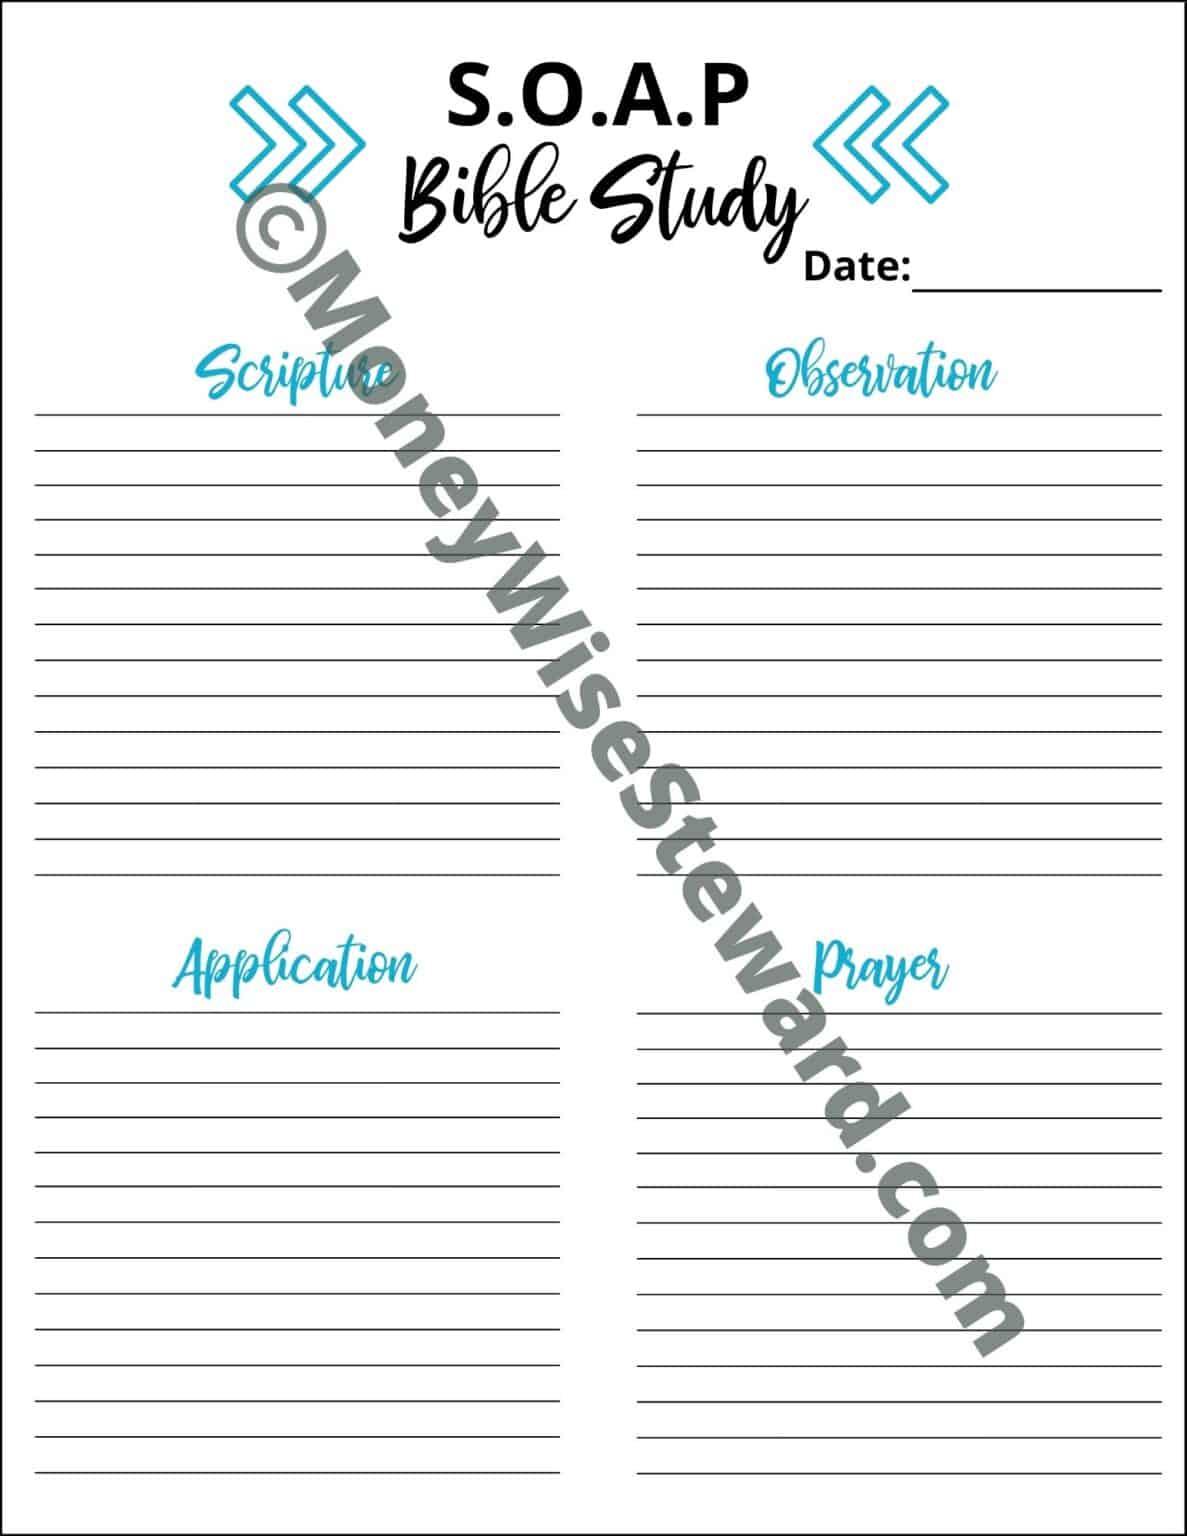 soap method study for bible